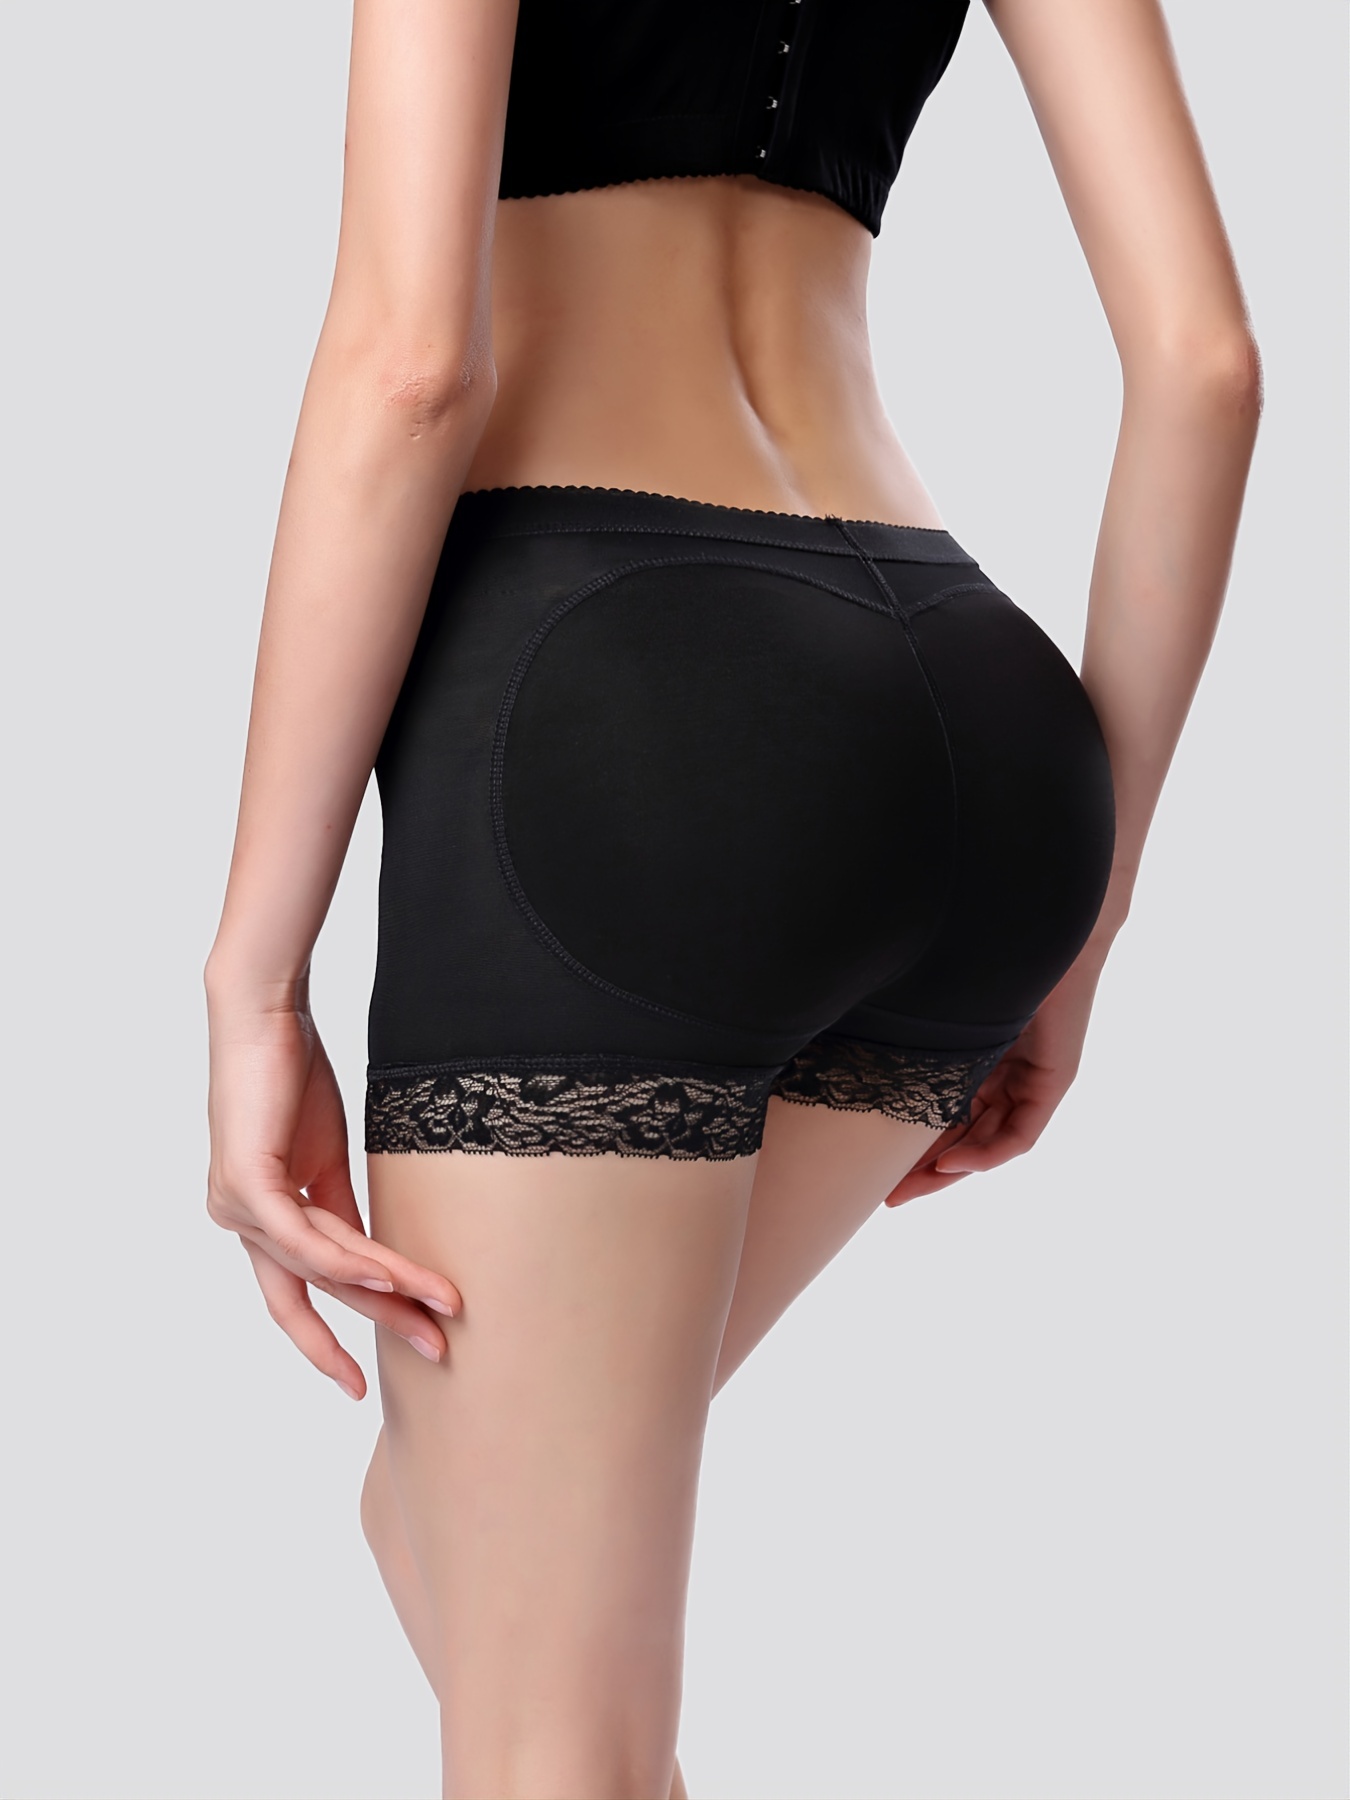 Comfortable & Soft Panties With Padded Buttocks, High Waist Lace Mesh  Seamless Shorts Control Panties, High Coverage Women's Underwear & Lingerie